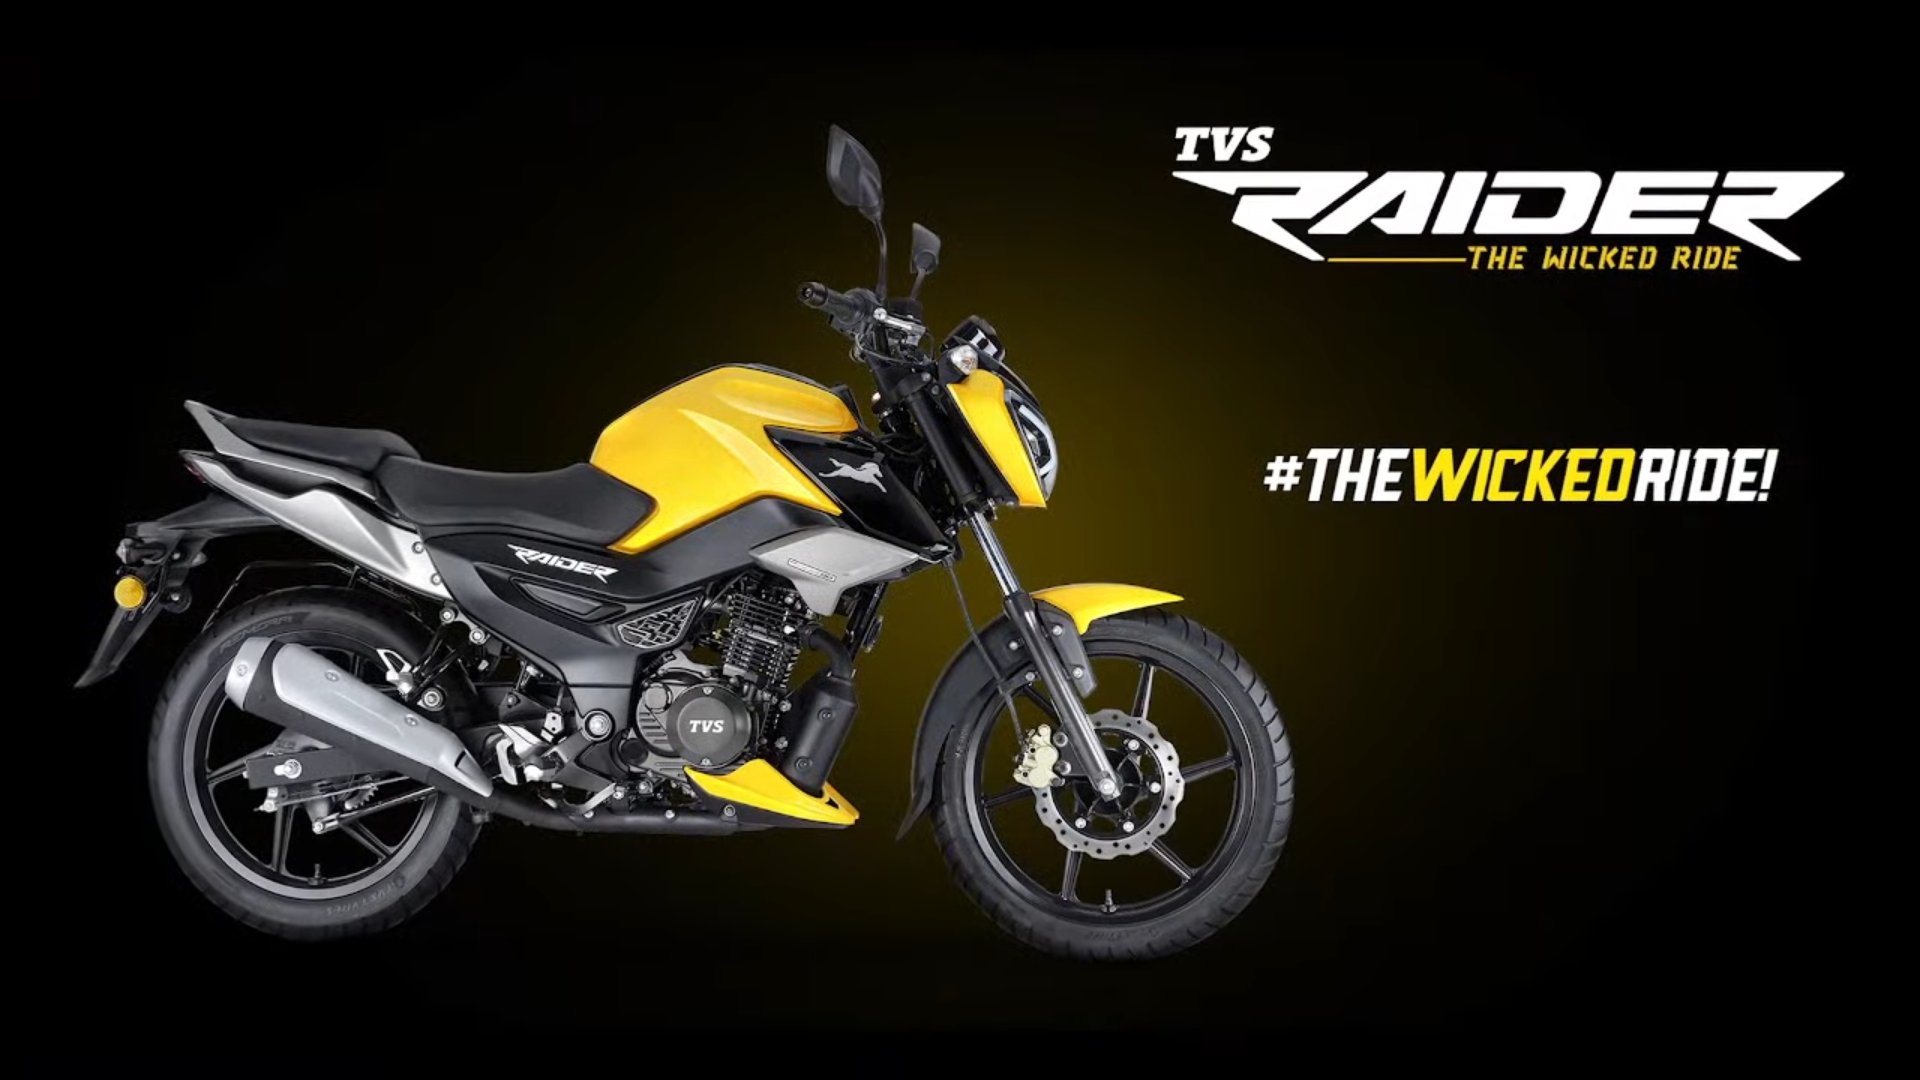 OVERDRIVE has just launched the Raider 125. #TVSRaider #odmag